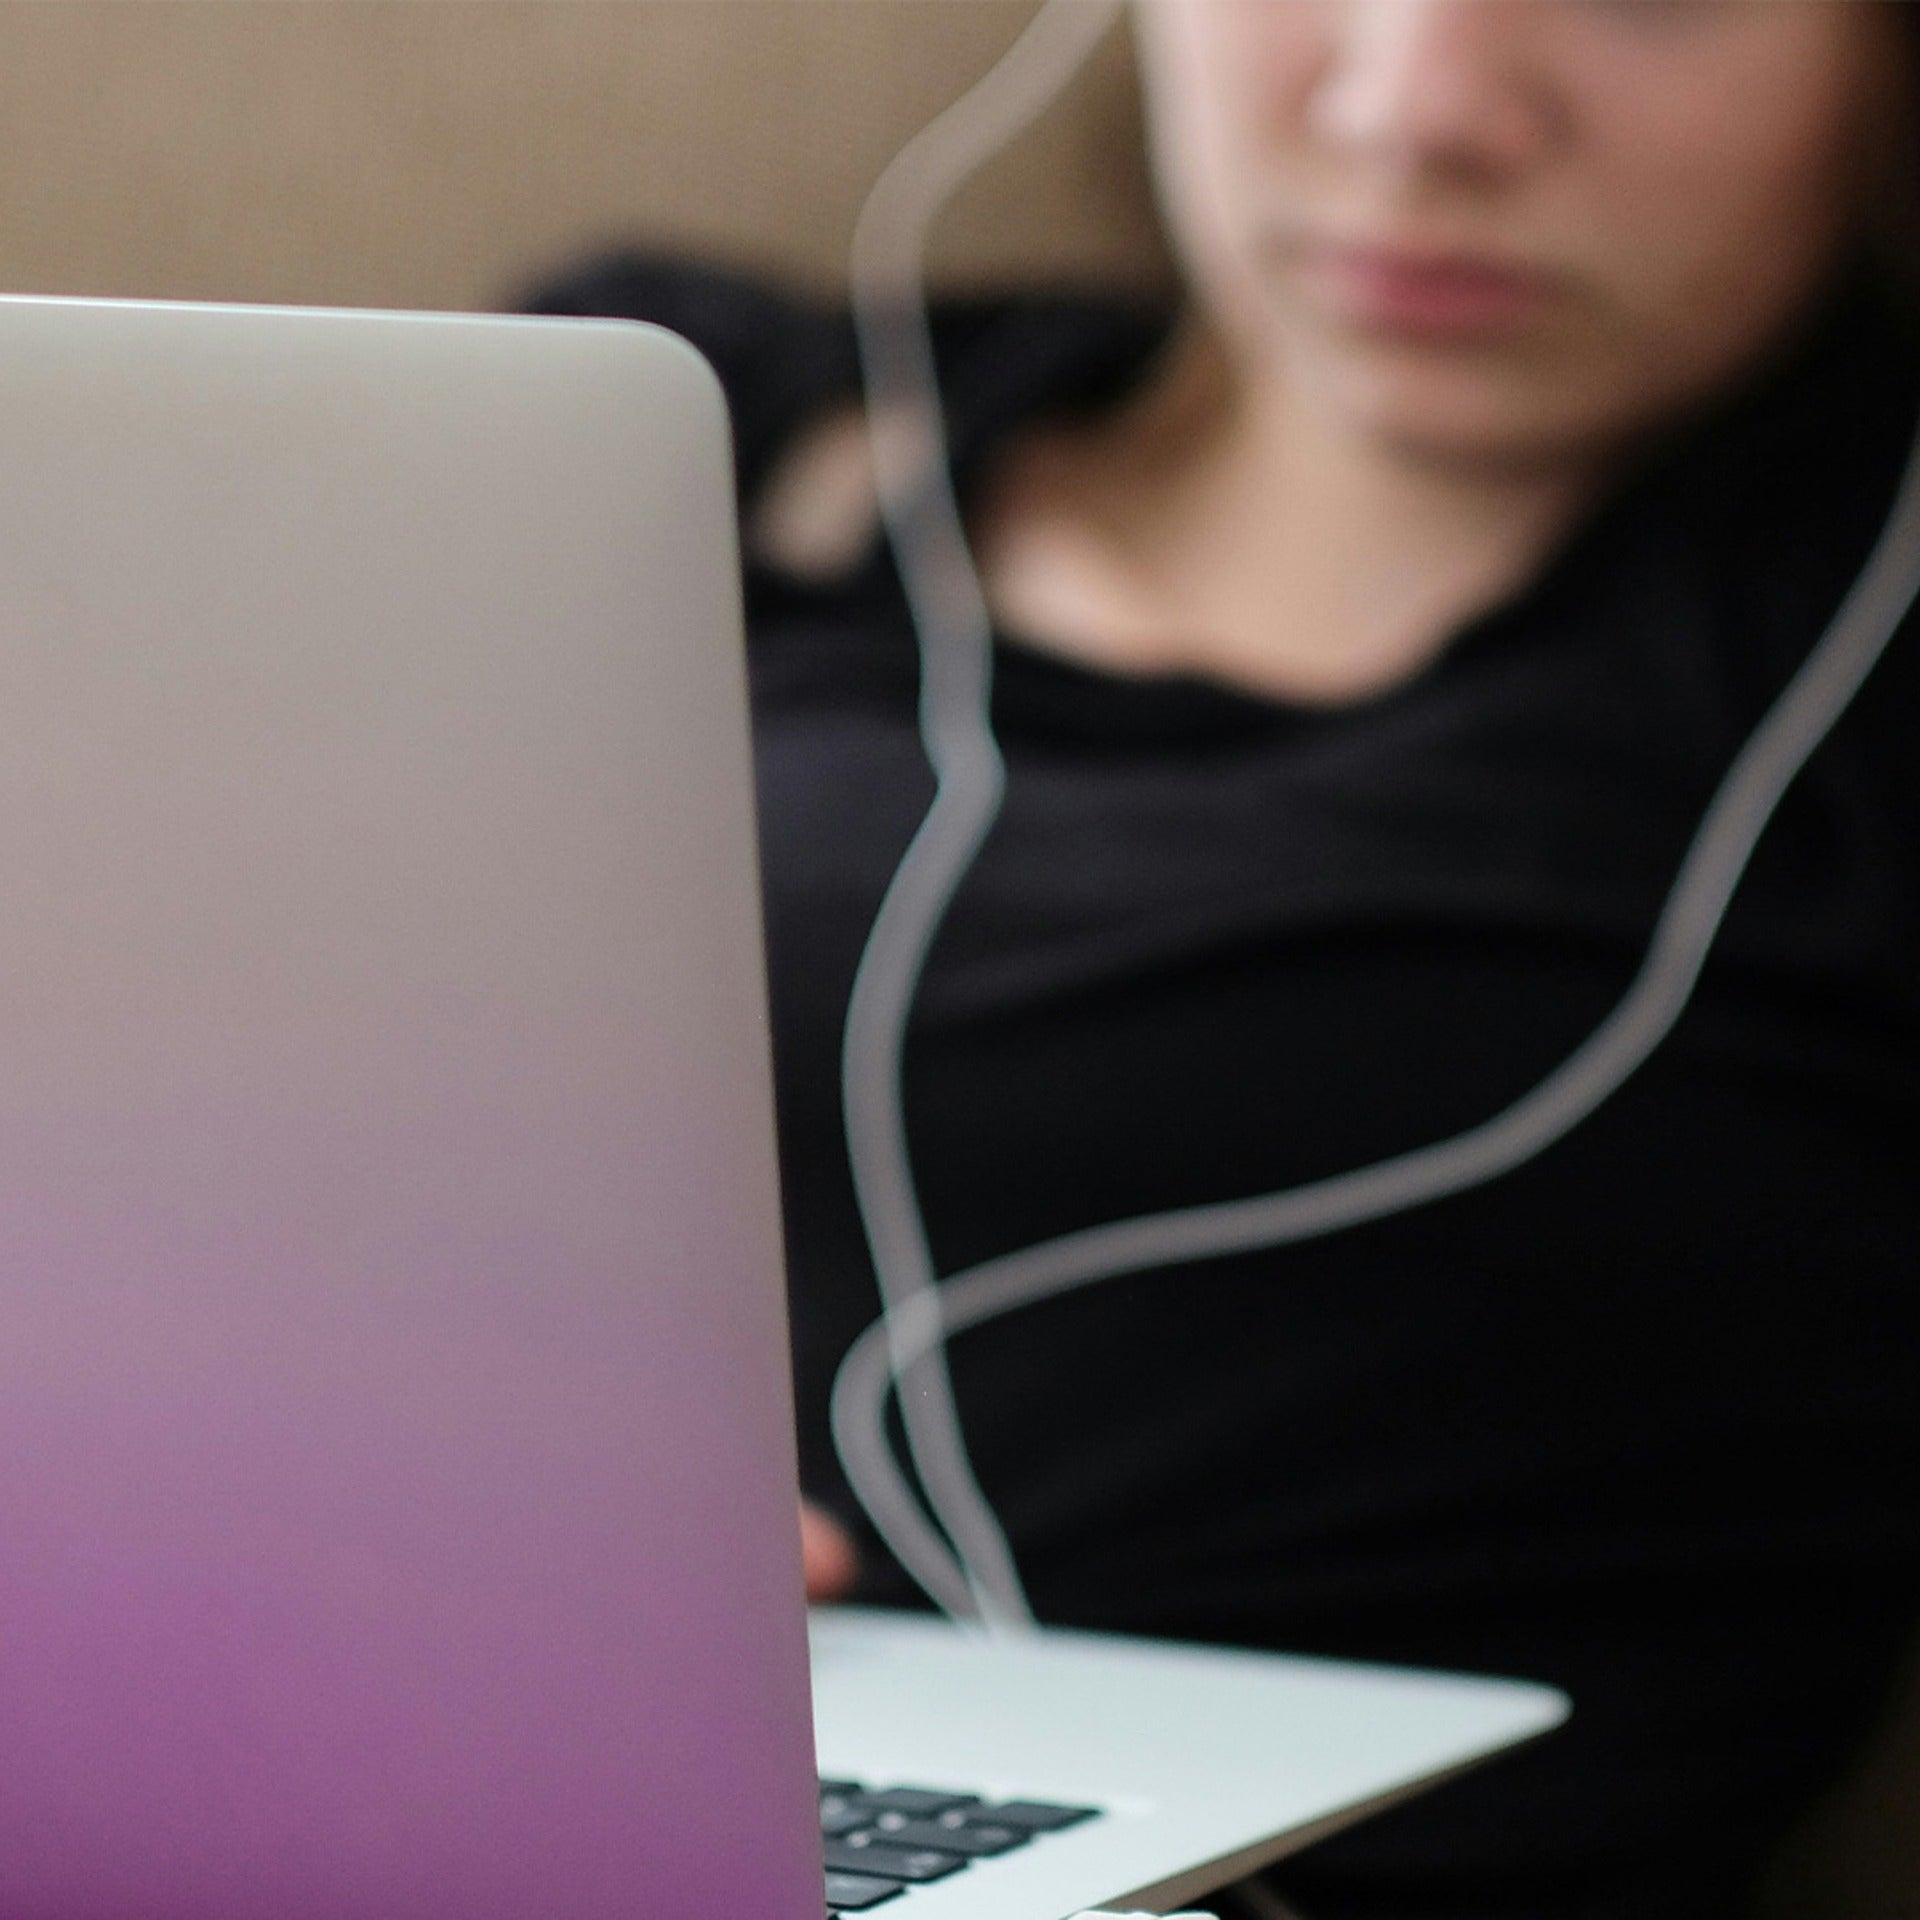 Woman looking at a laptop screen while earbuds are in her ear